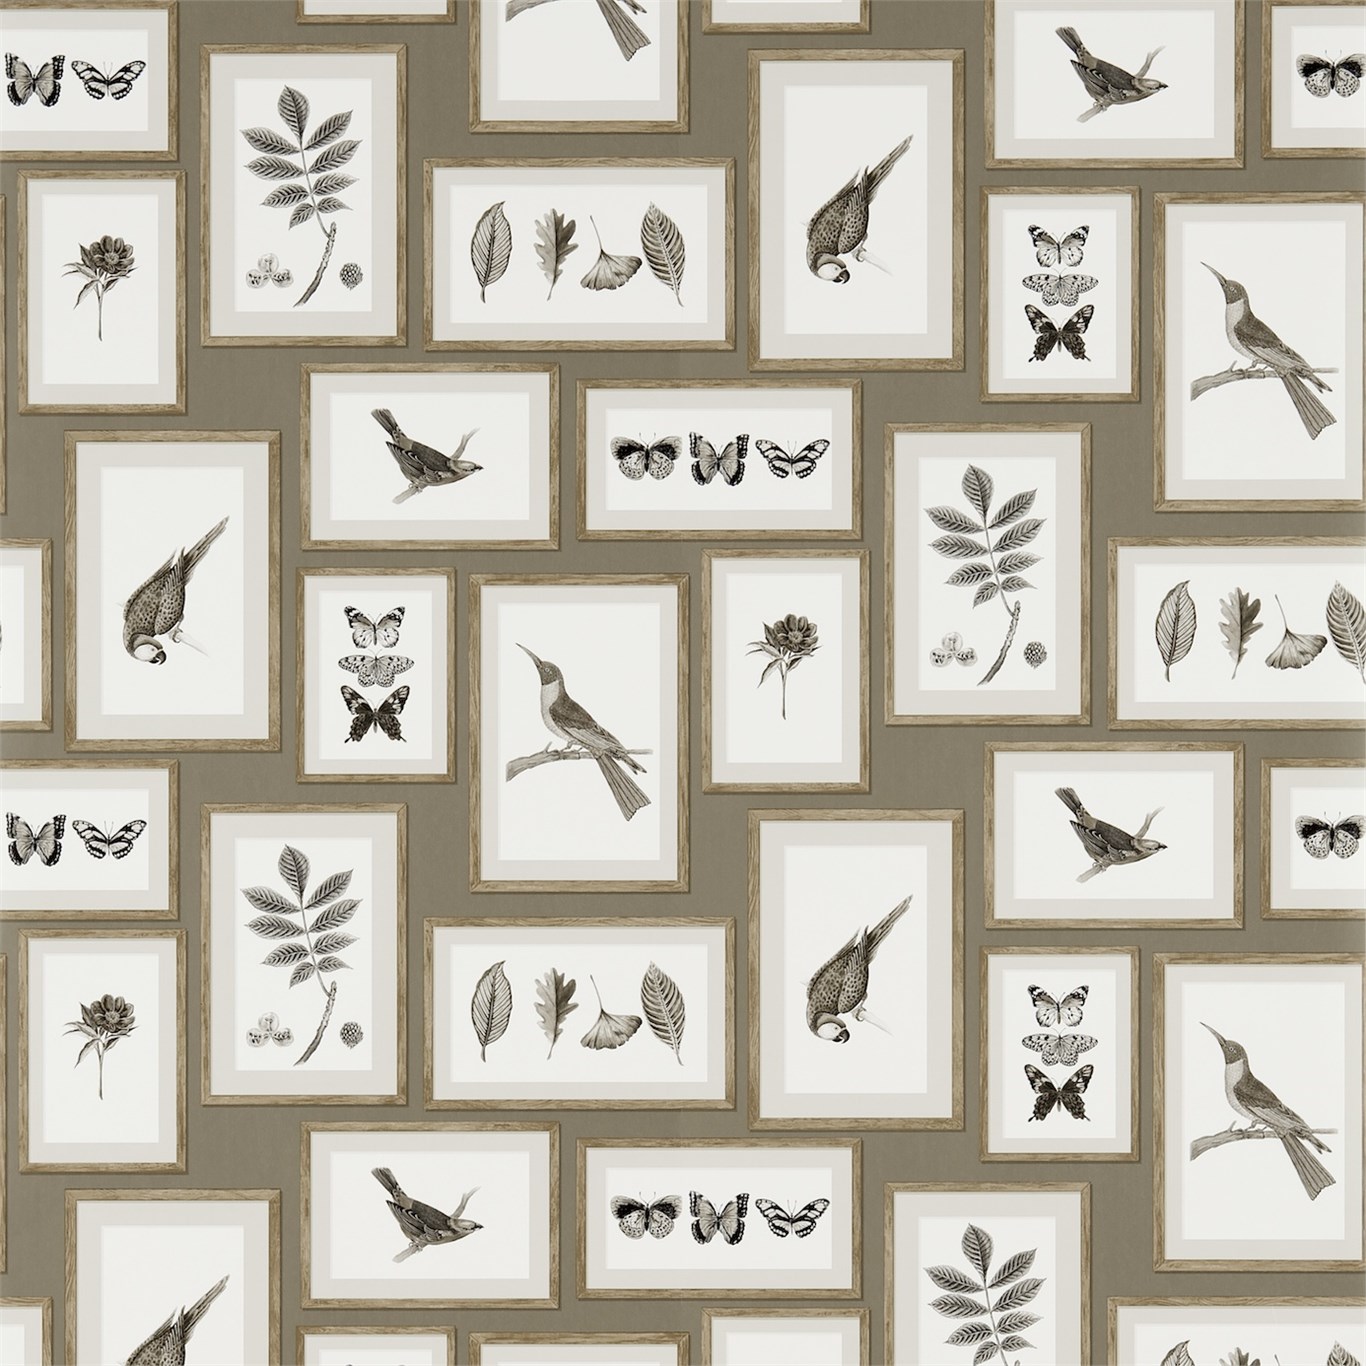 Wallpaper - Sanderson Voyage of Discovery Picture Gallery Taupe/Sepia